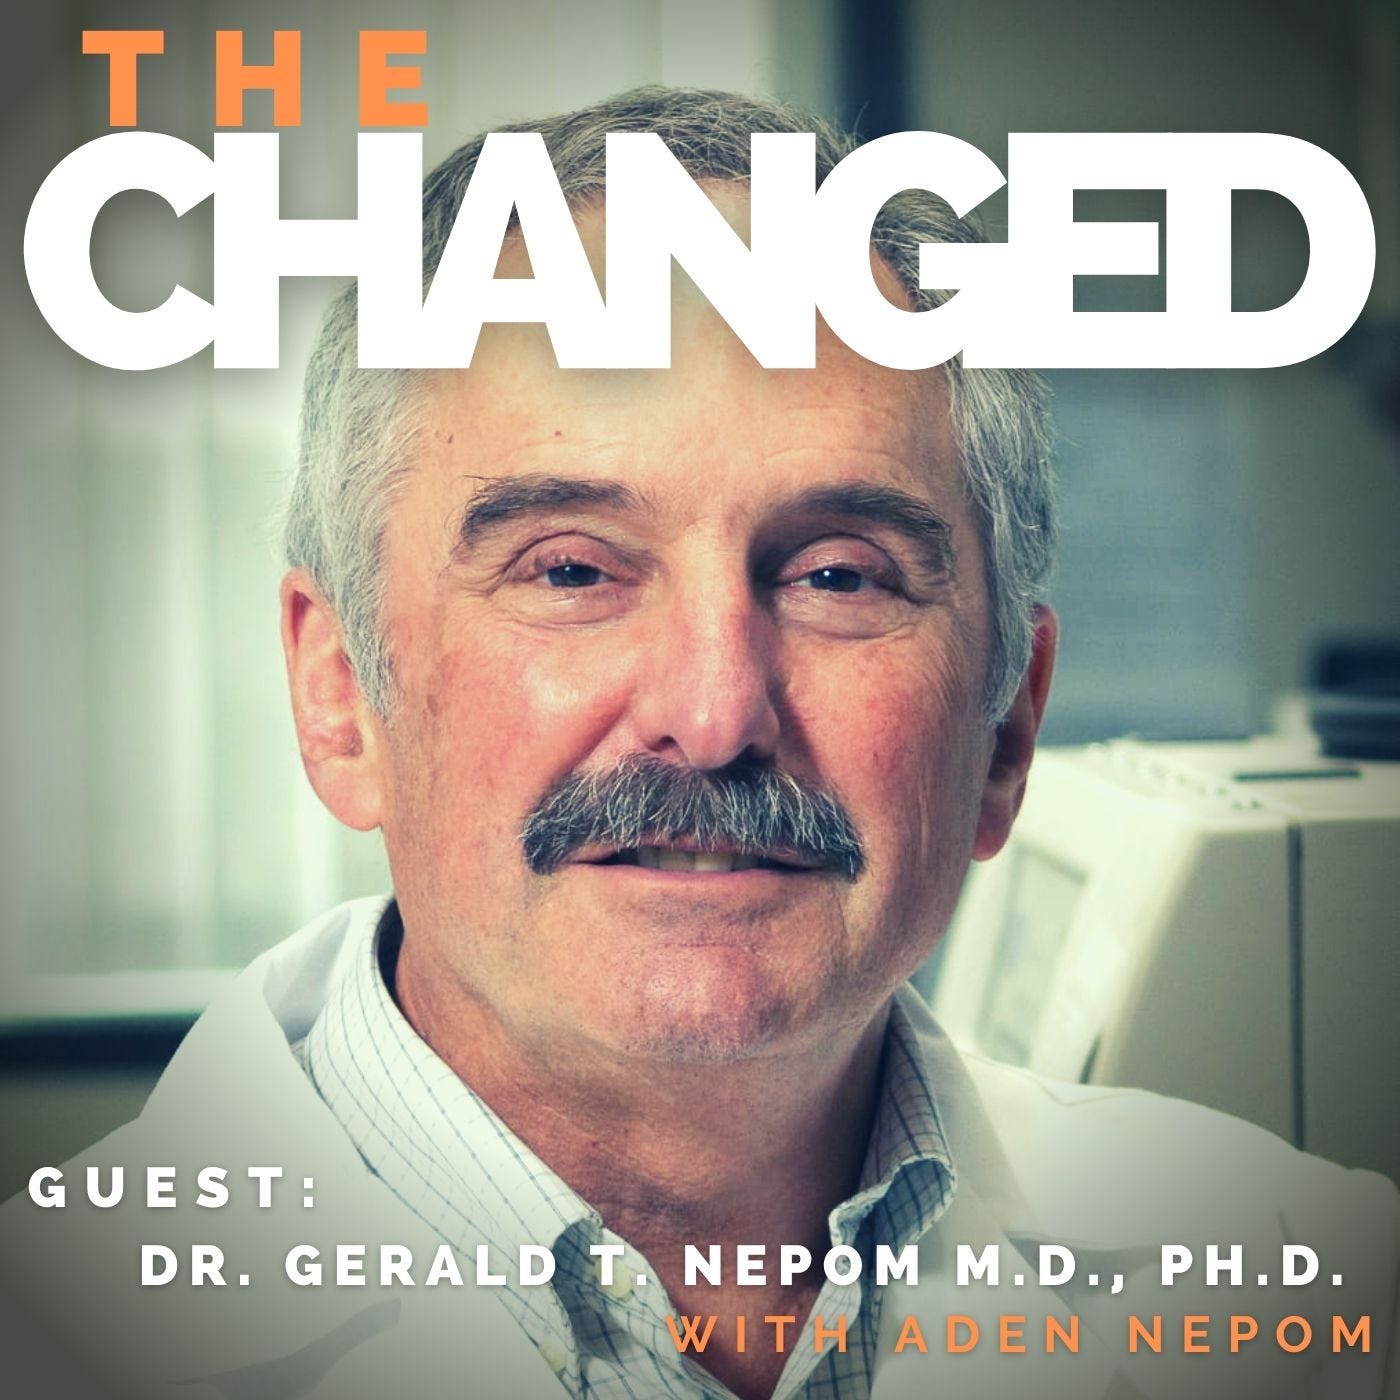 Science! Dr. Gerald T. Nepom M.D., Ph.D. Director of the Immune Tolerance Network